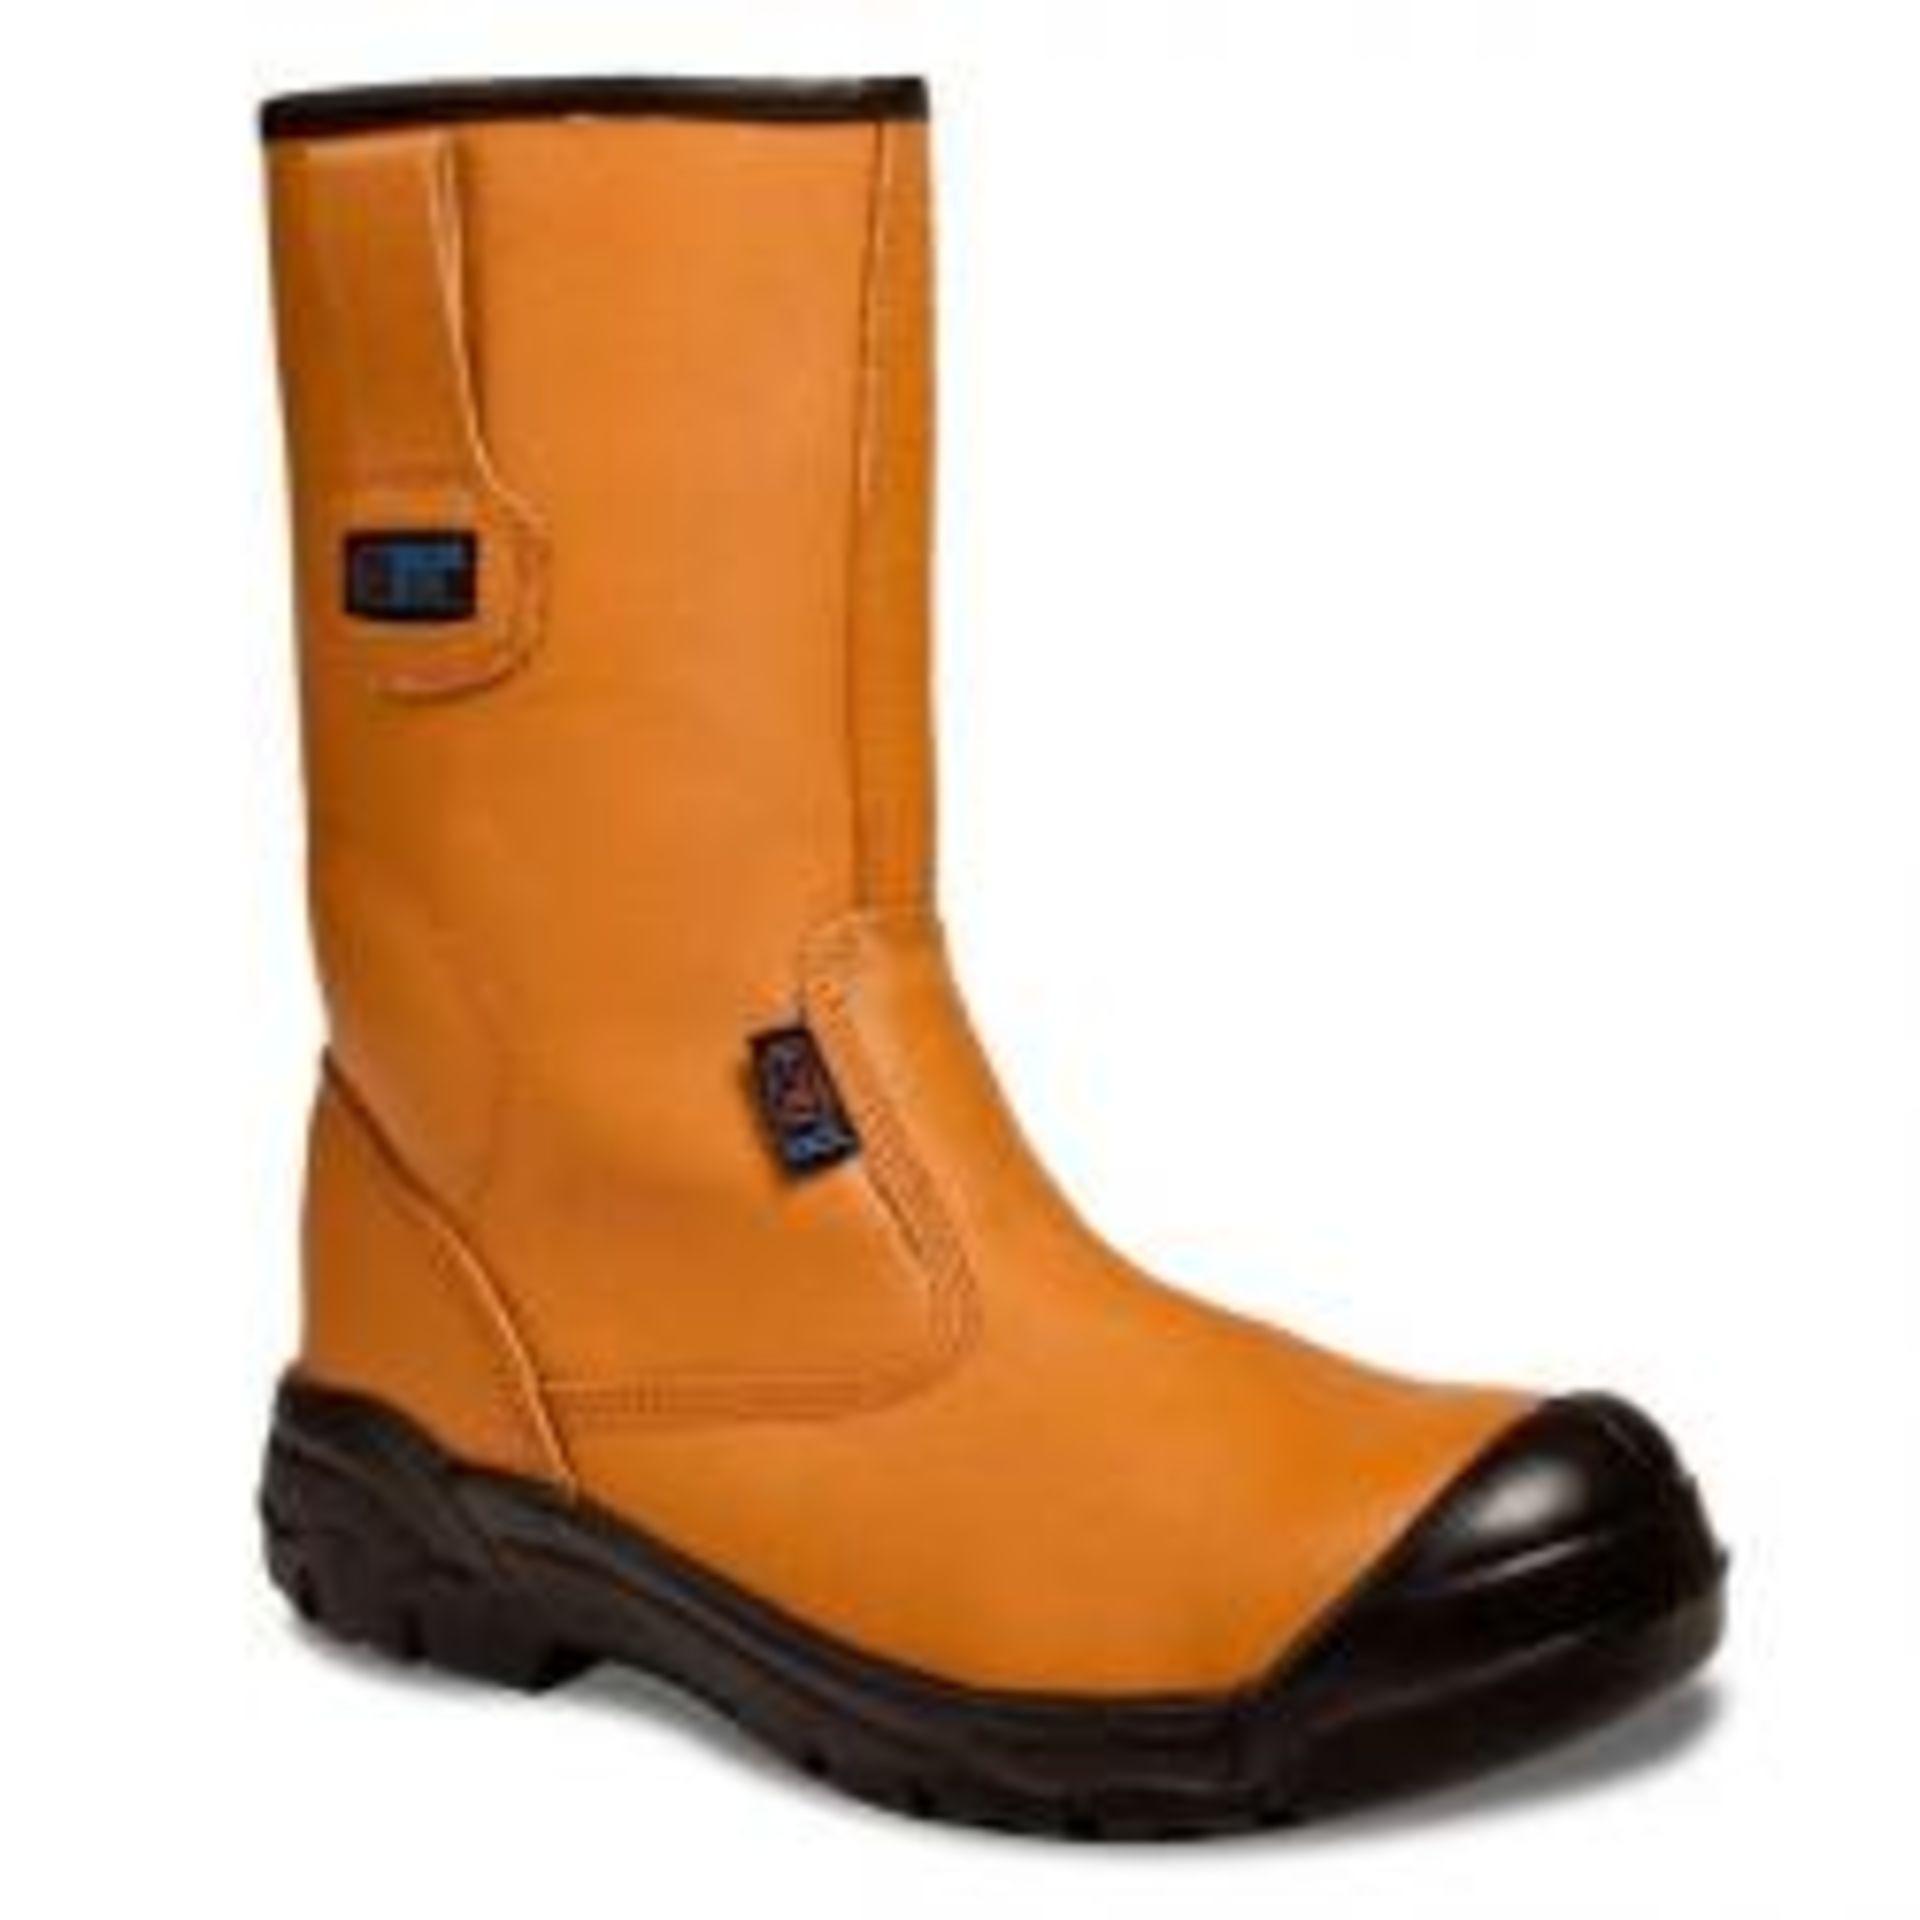 V Brand New Pair SuperTouch Tan Leather With Rubber Toe Cap Rigger Plus Boots Size 7 ISP £29.94 (